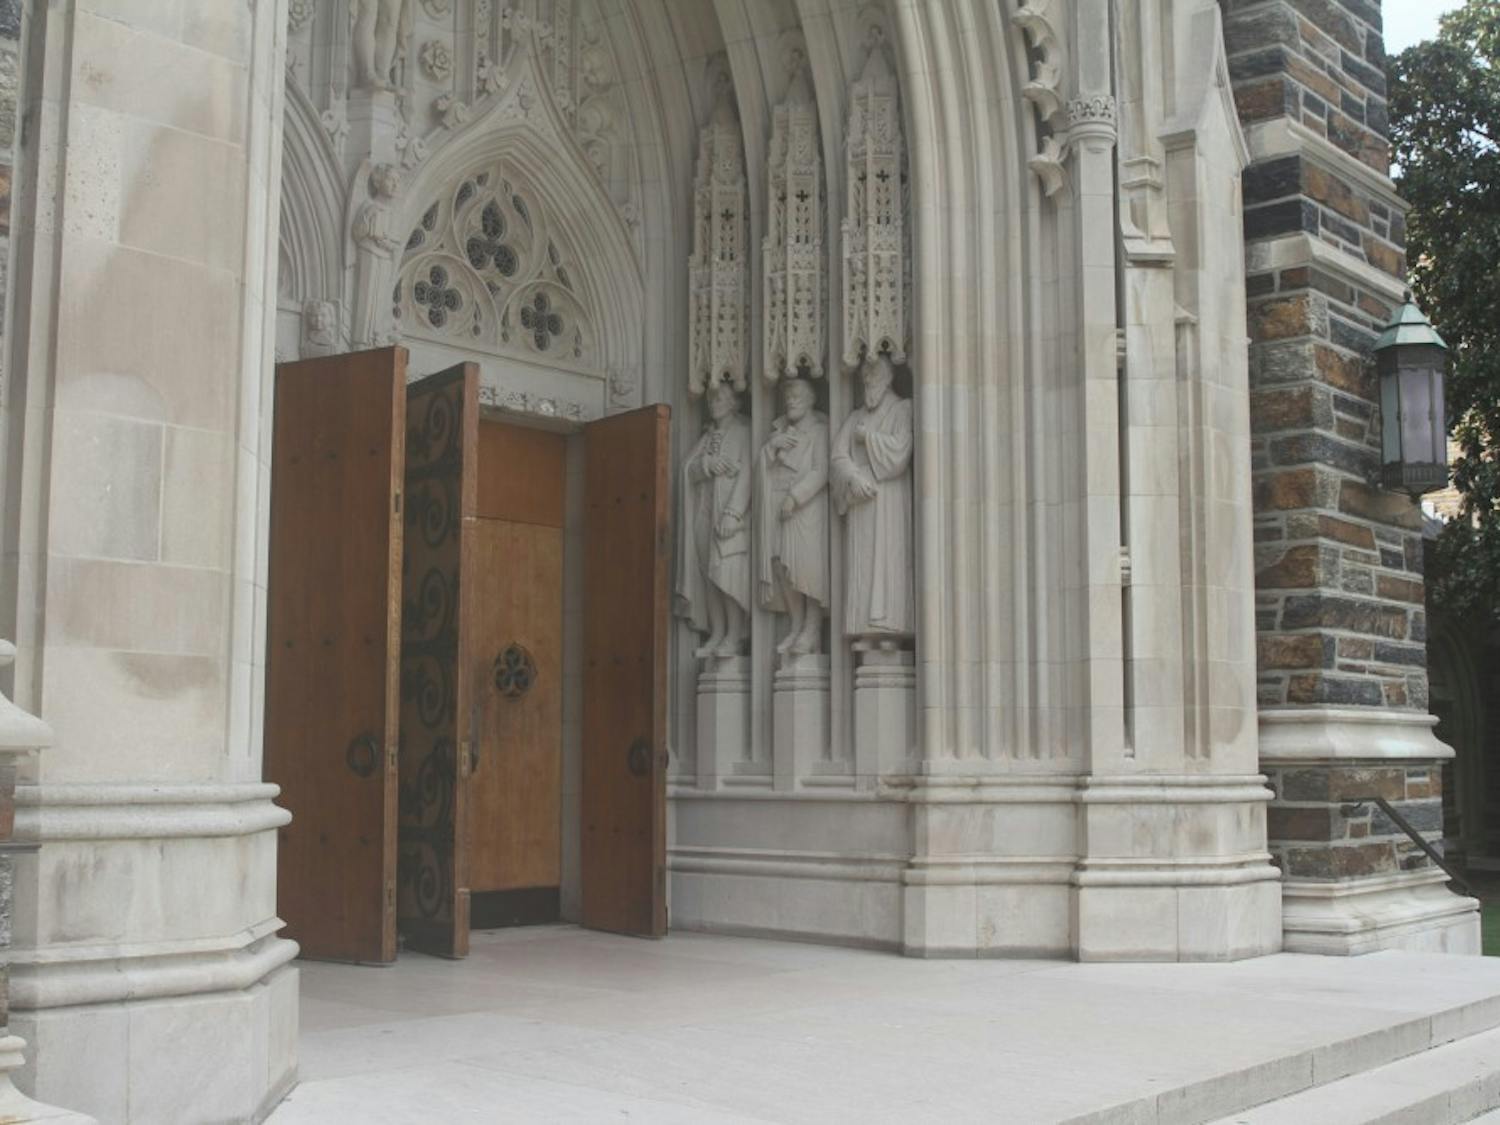 Lee's statue is located to the right of Duke Chapel's front doors.